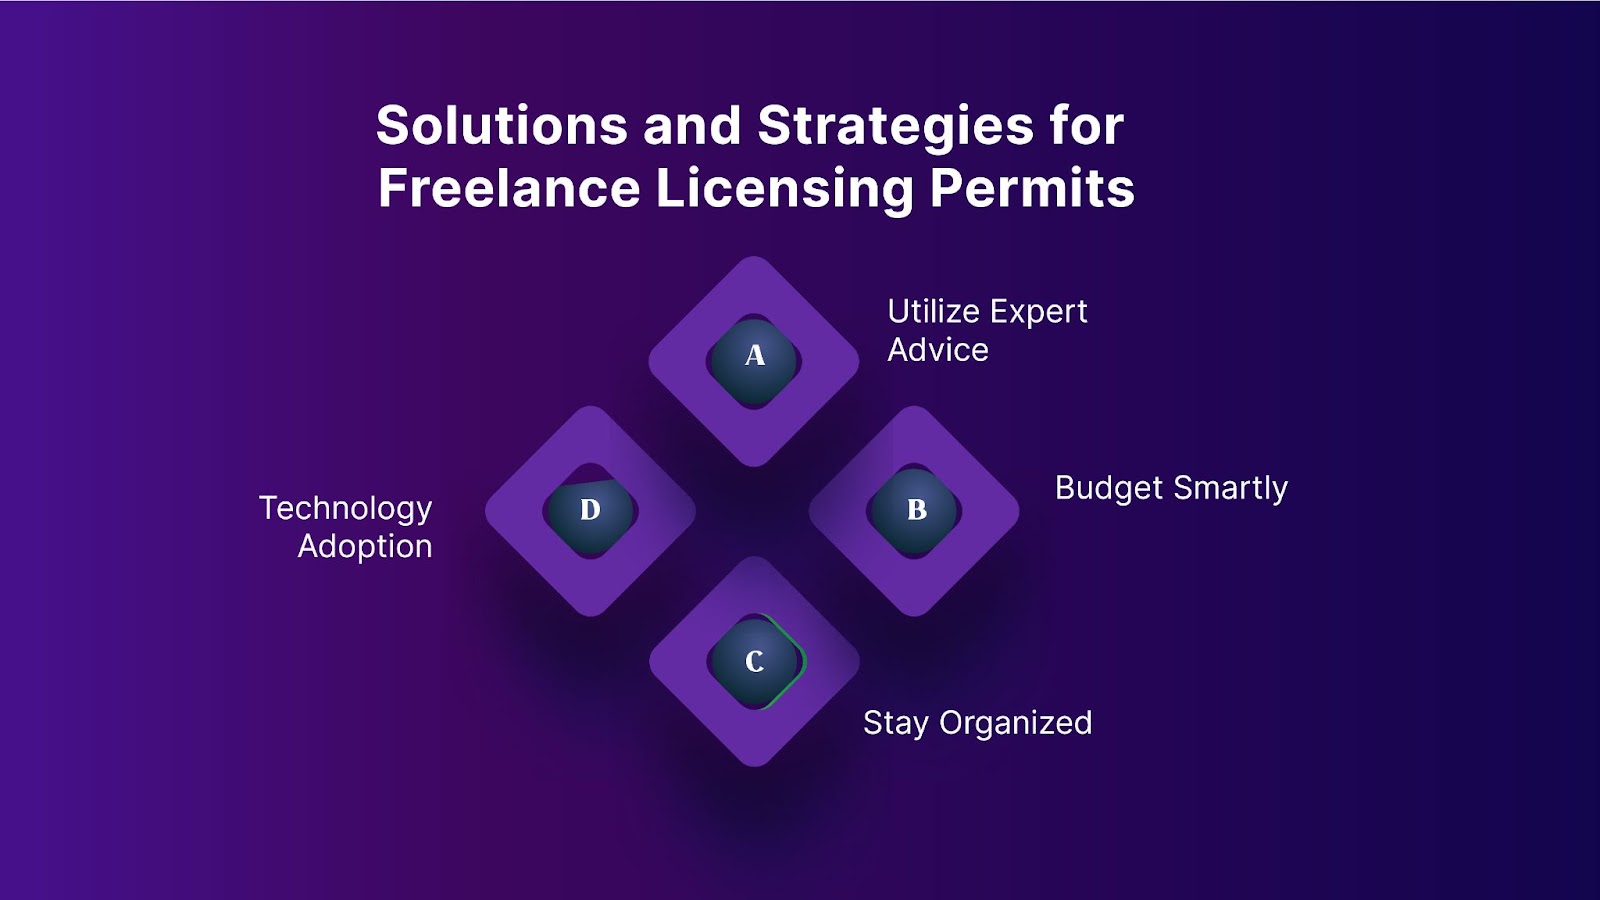 Solutions and Strategies for Freelance Licensing Permits